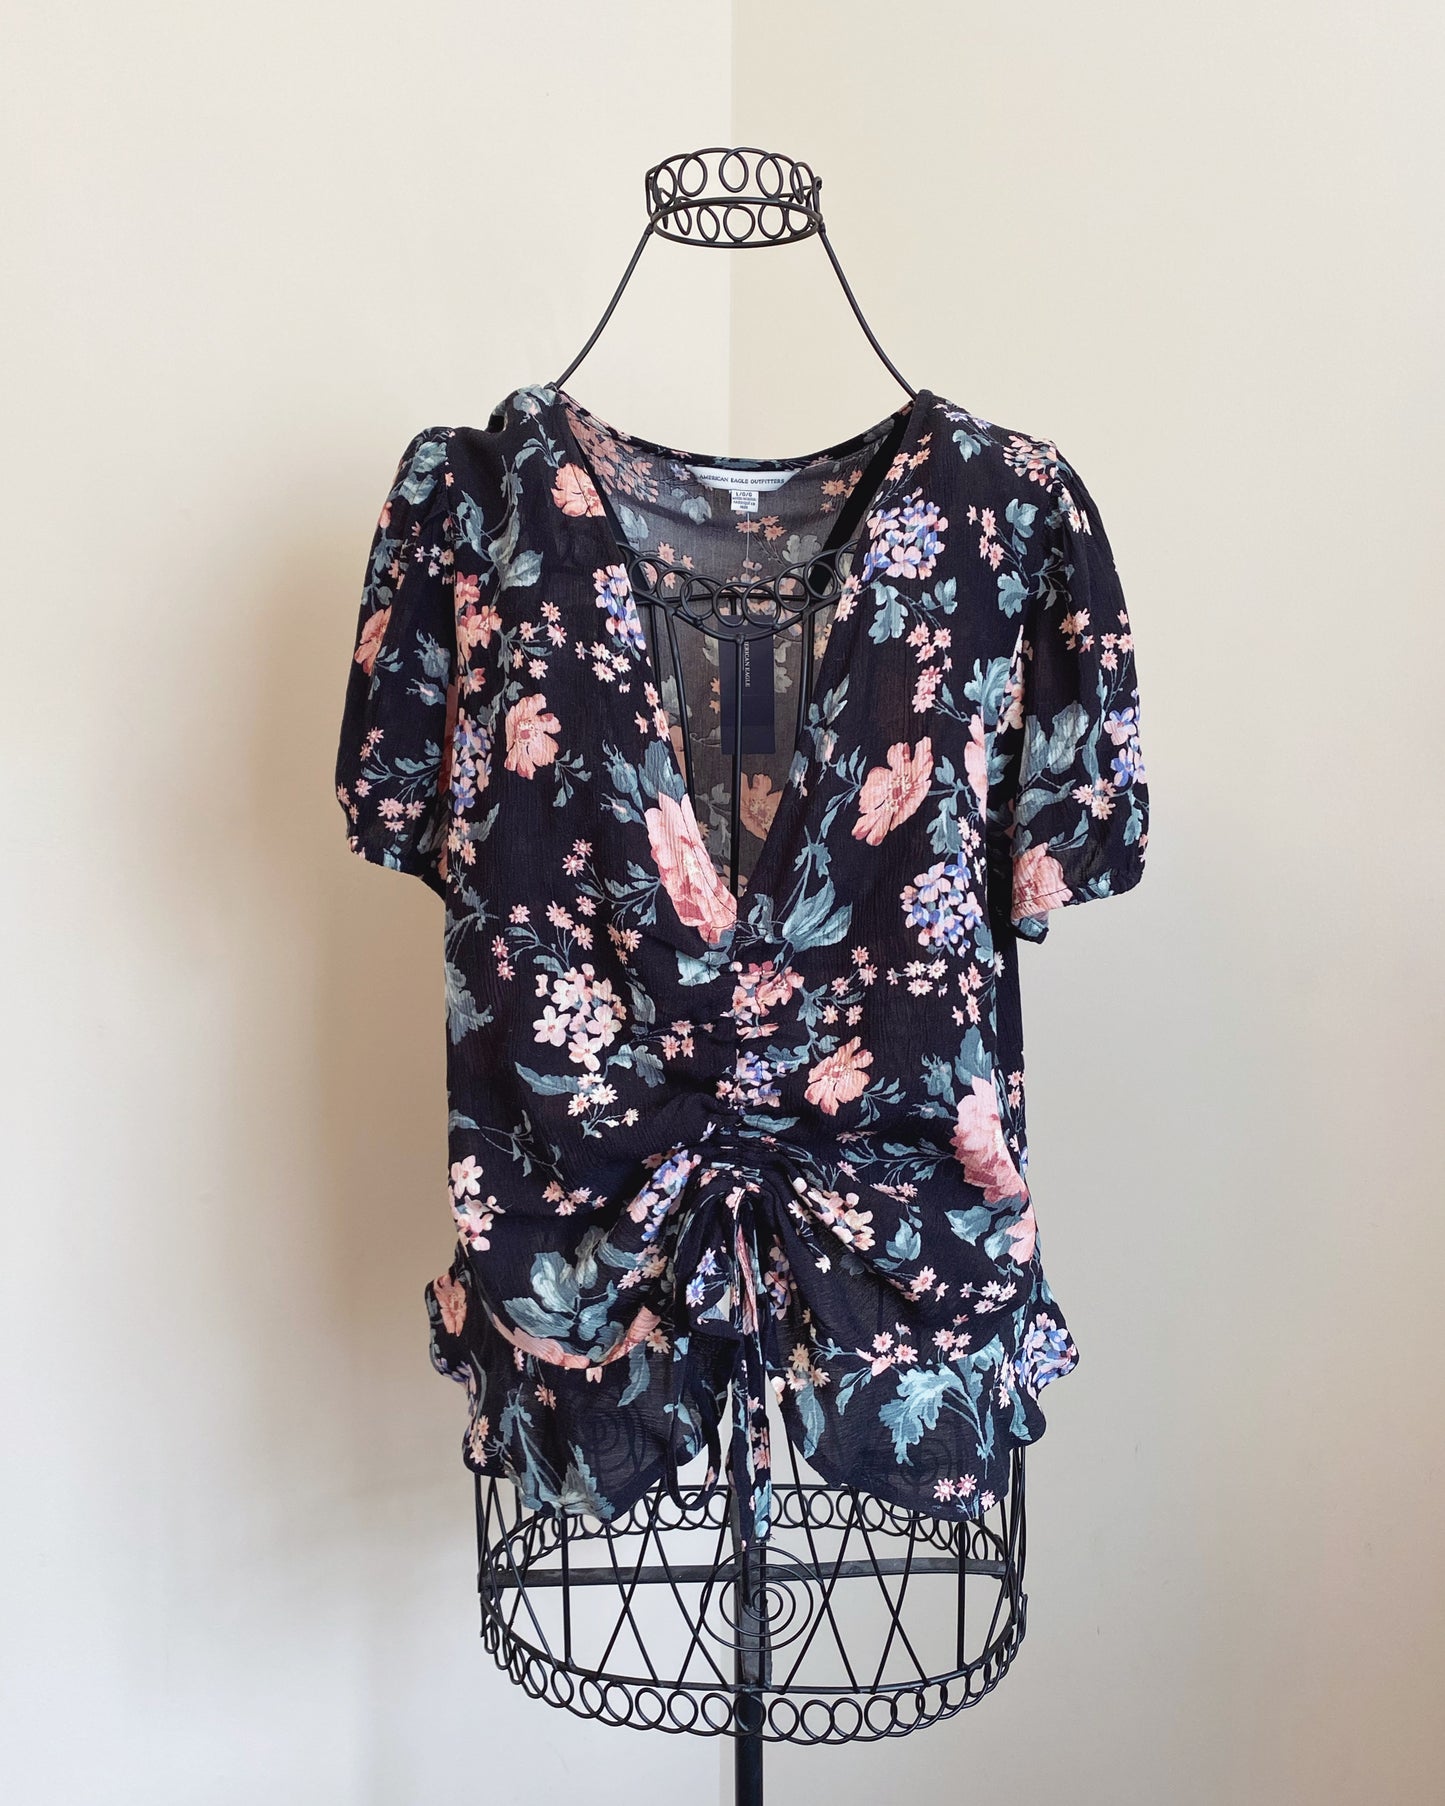 NWT American Eagle Cinched Floral Top